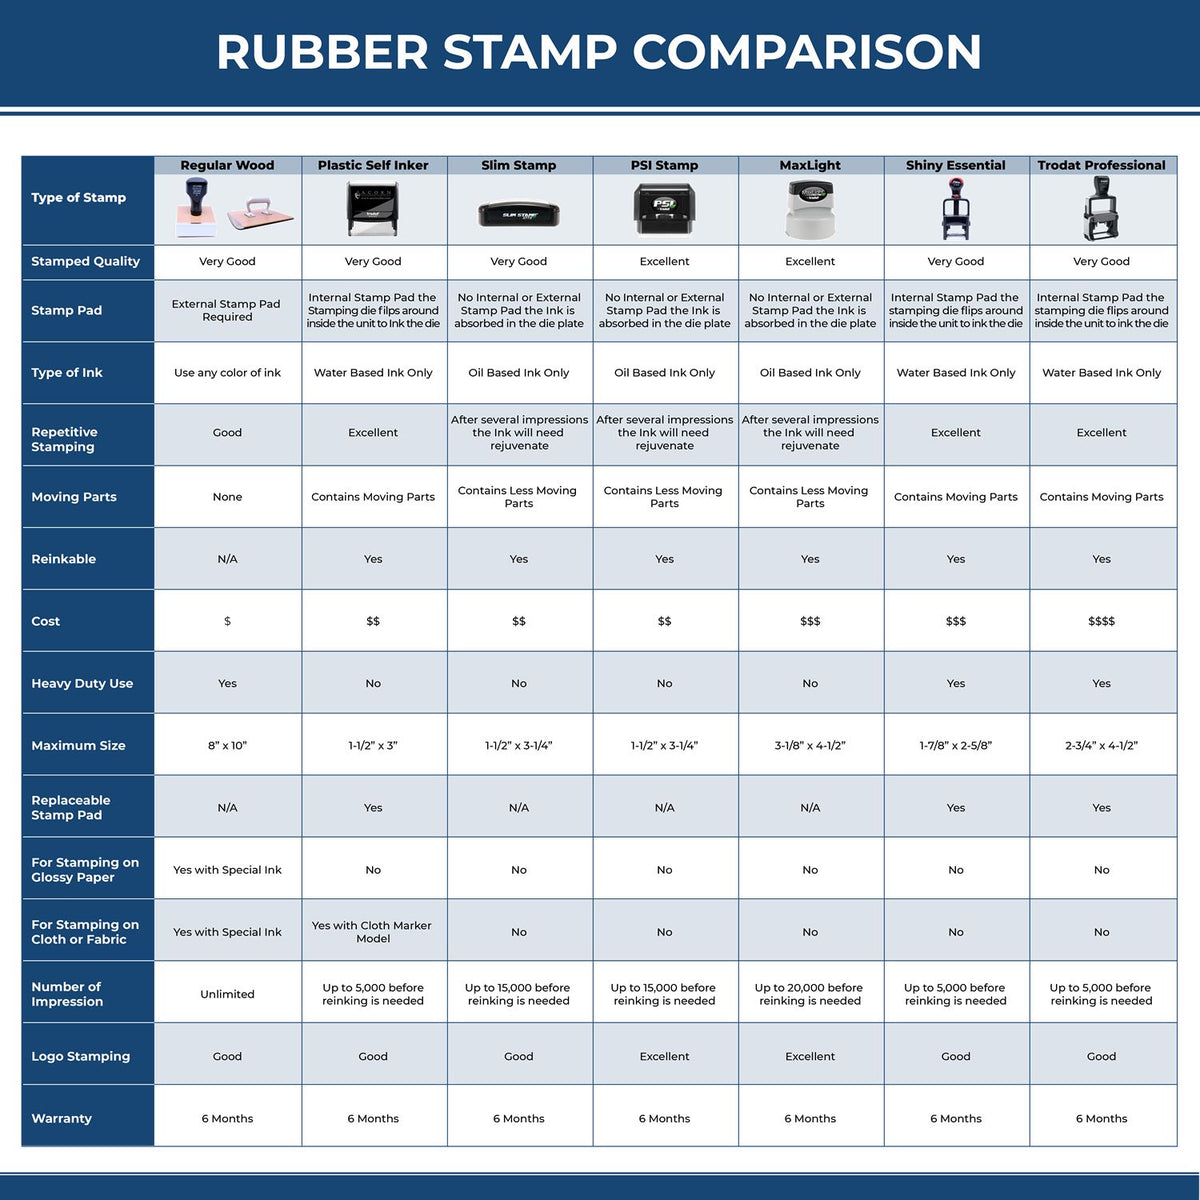 Patients Signature on File Rubber Stamp 4184R Rubber Stamp Comparison